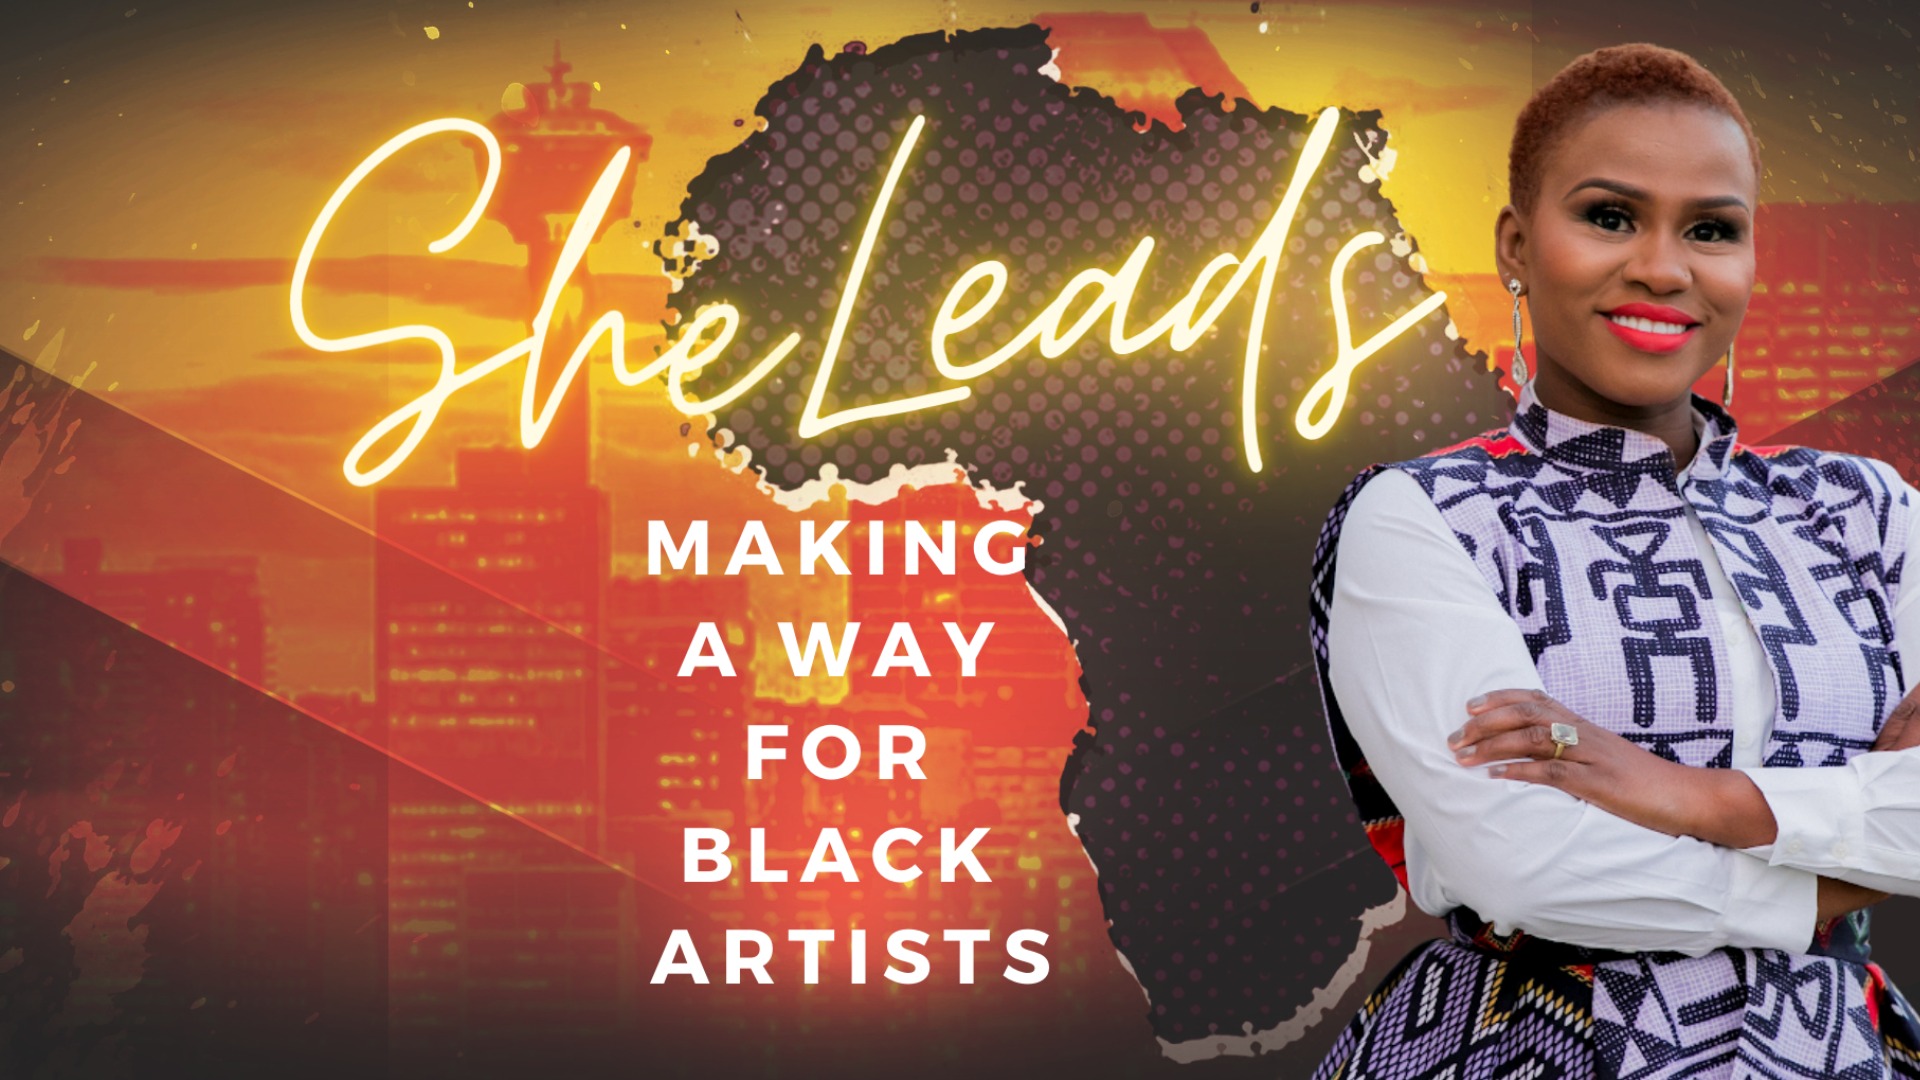 She Leads: Making a Way for Black Artists